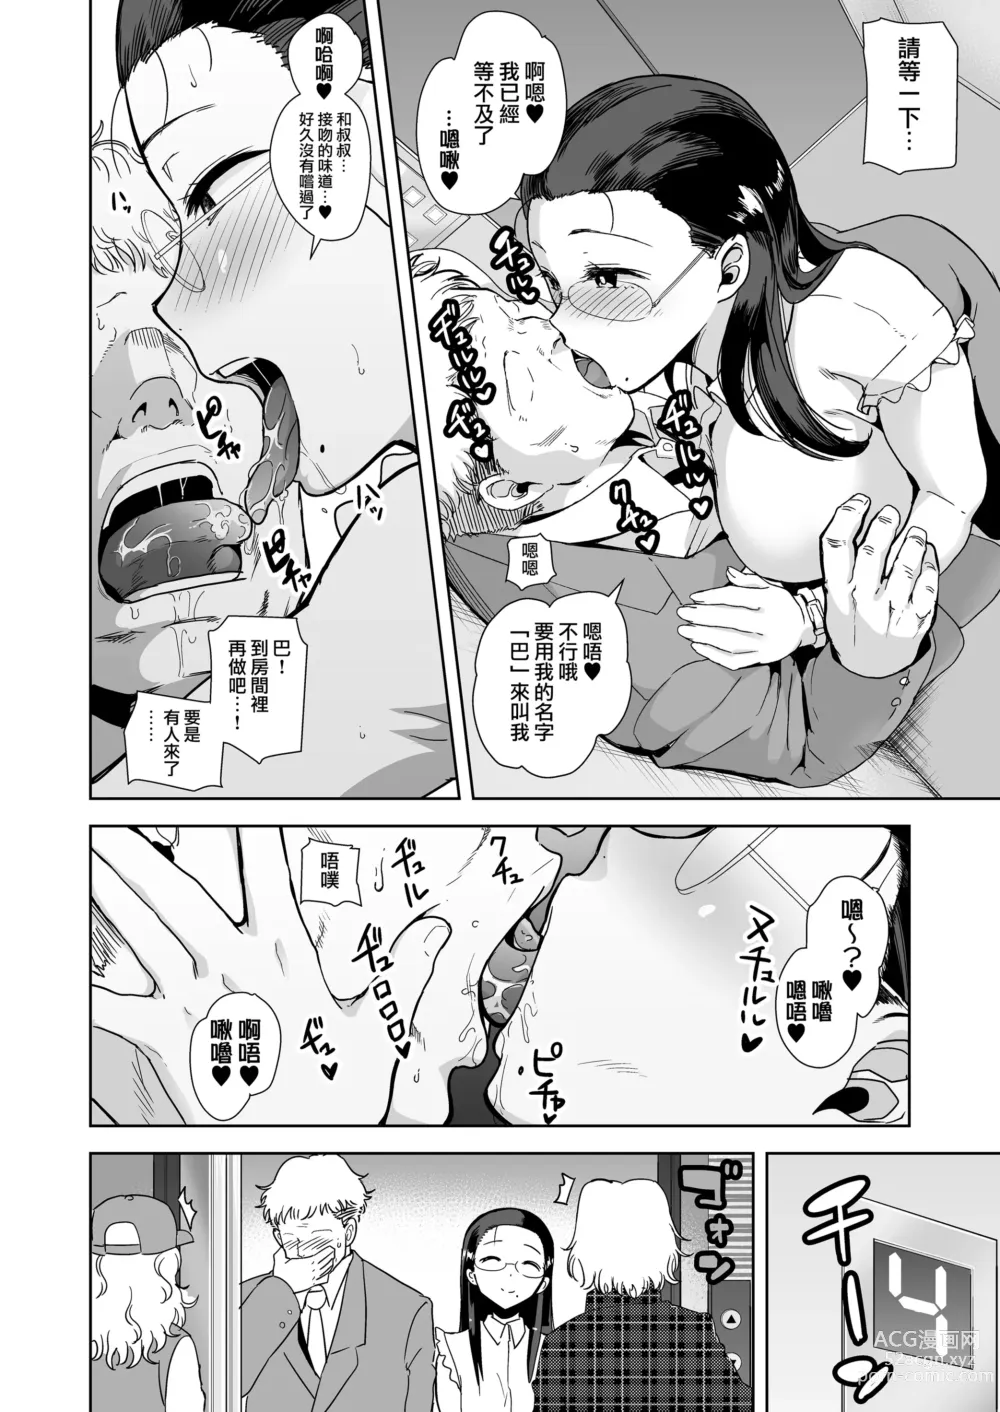 Page 7 of doujinshi 聖華女学院高等部公認竿おじさん1-6